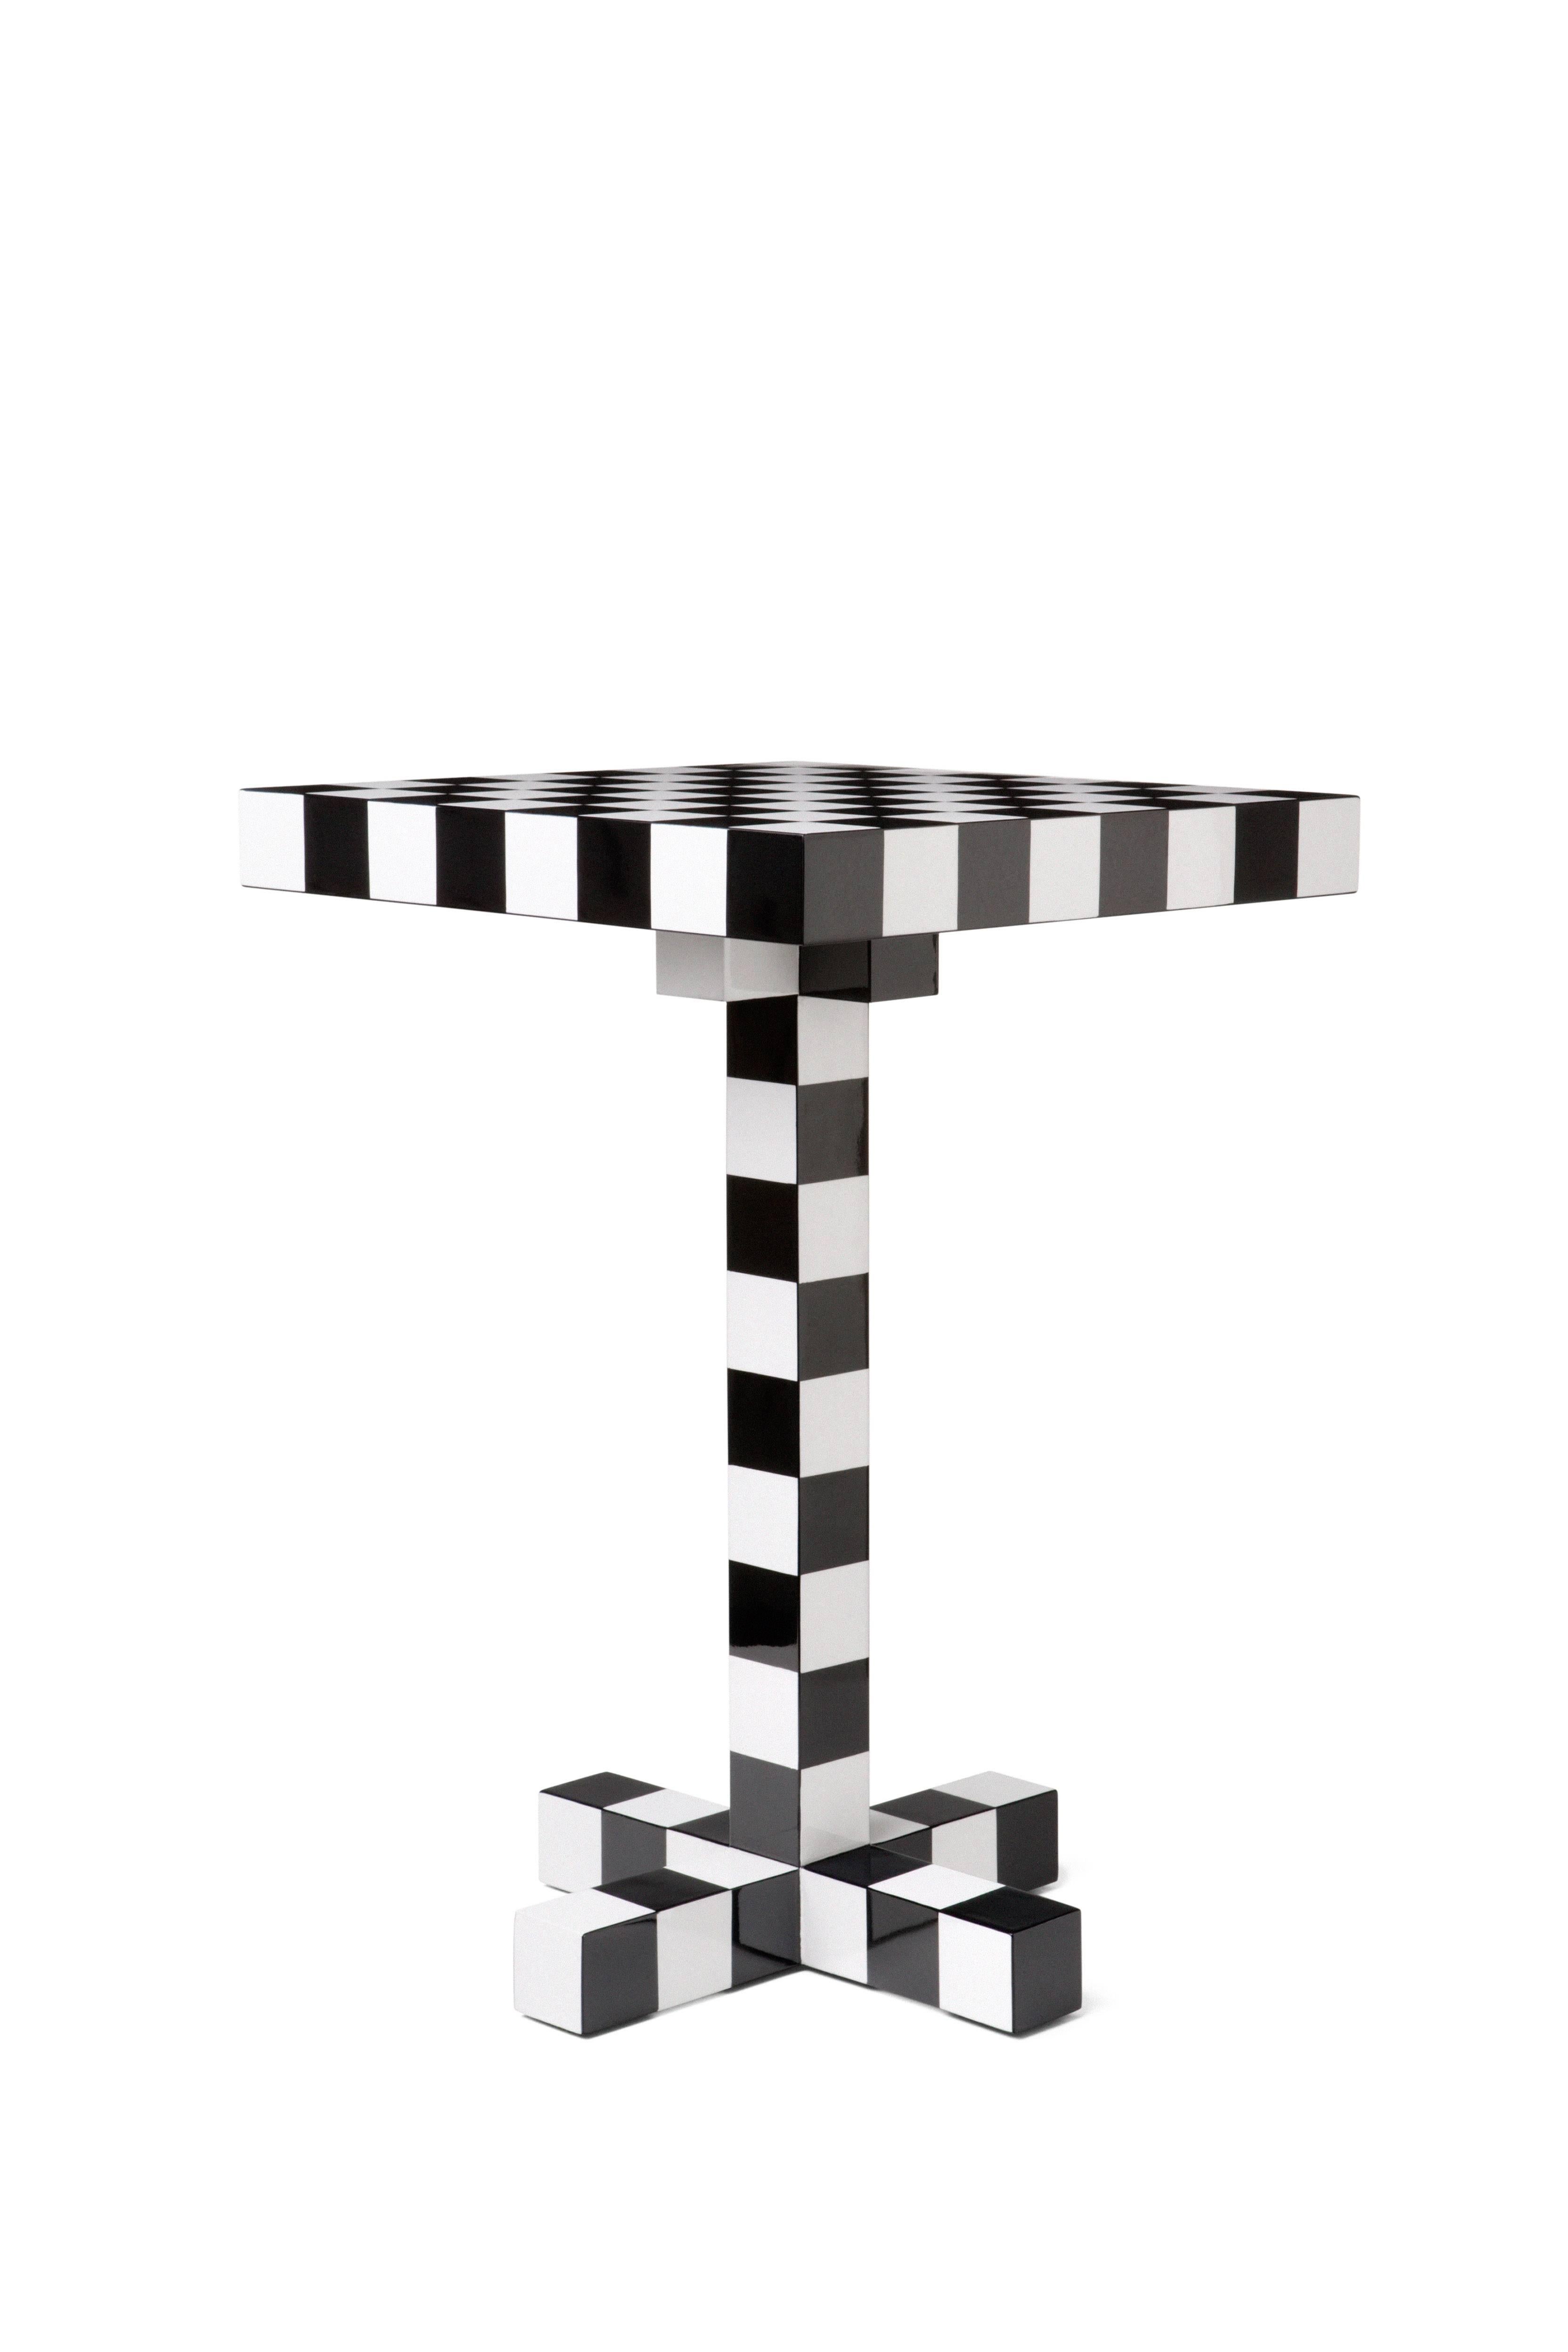 The decoration on the side table can be used for playing games. A table for pastime, rivalry and cleverness.

Made of wood with internal steel frame, finished in high gloss lacquer, MDF top.

The chess table has a polished stainless steel